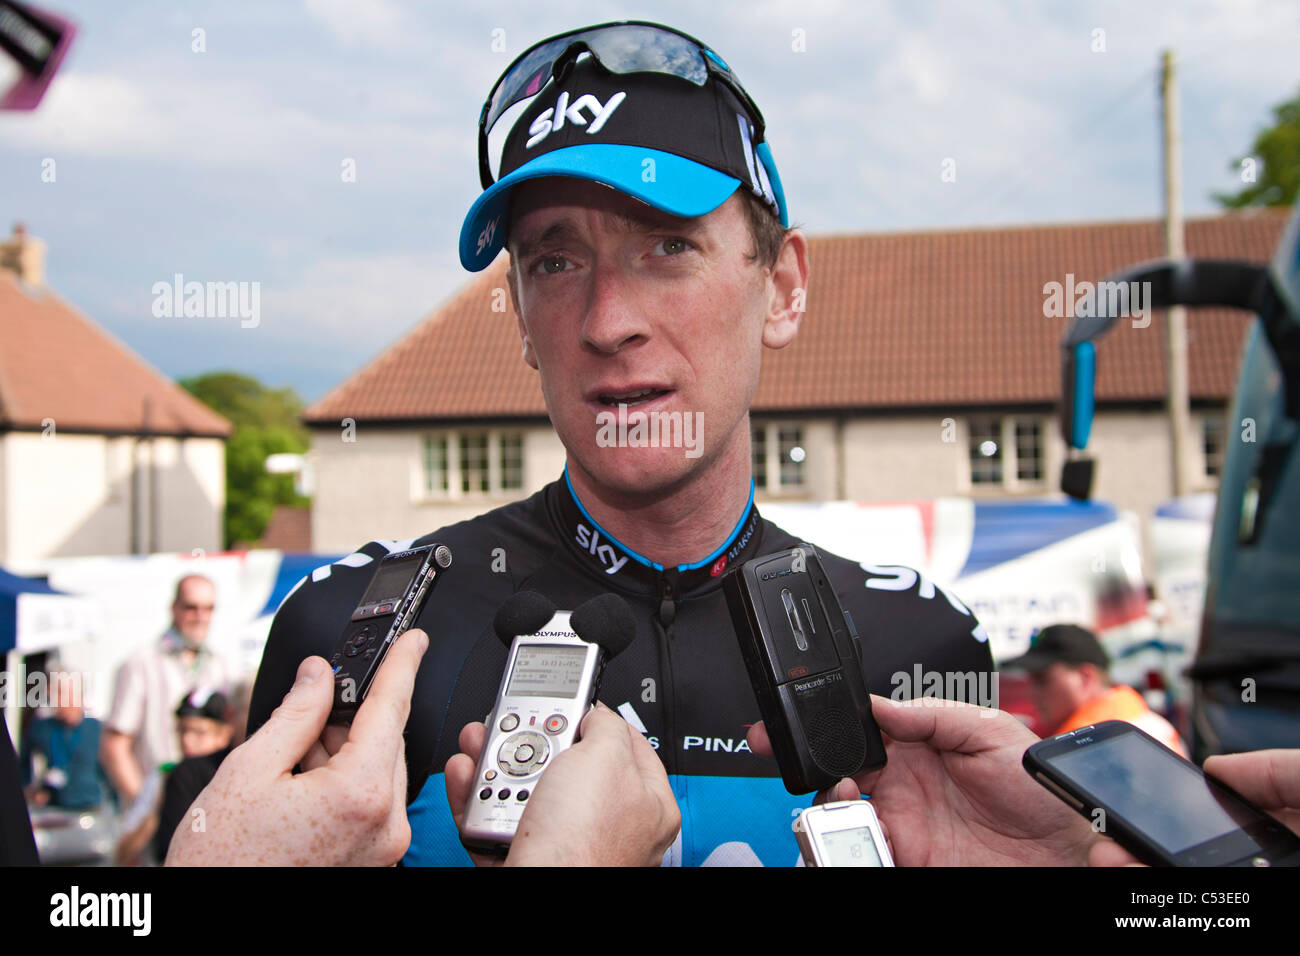 Bradley Wiggins being interviewed after winning the 2011 British National Road Cycling championship Stock Photo